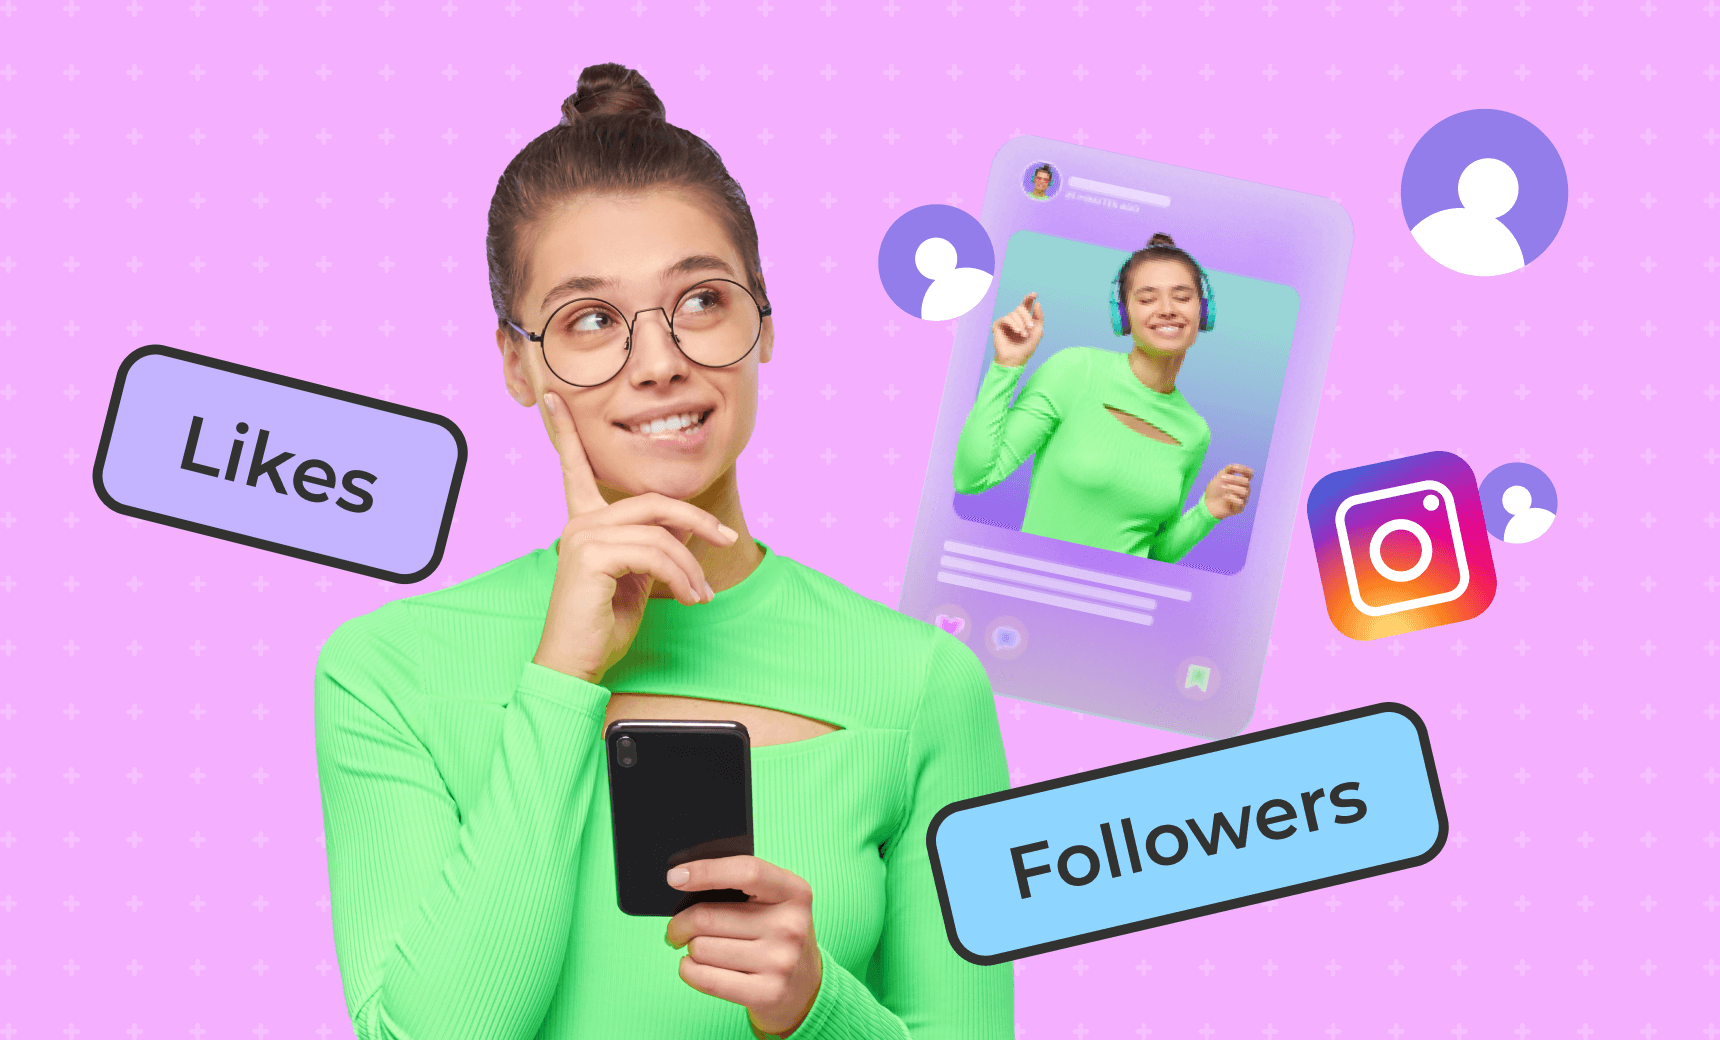 How Many Instagram Followers Do You Need To Make Money In 2023?